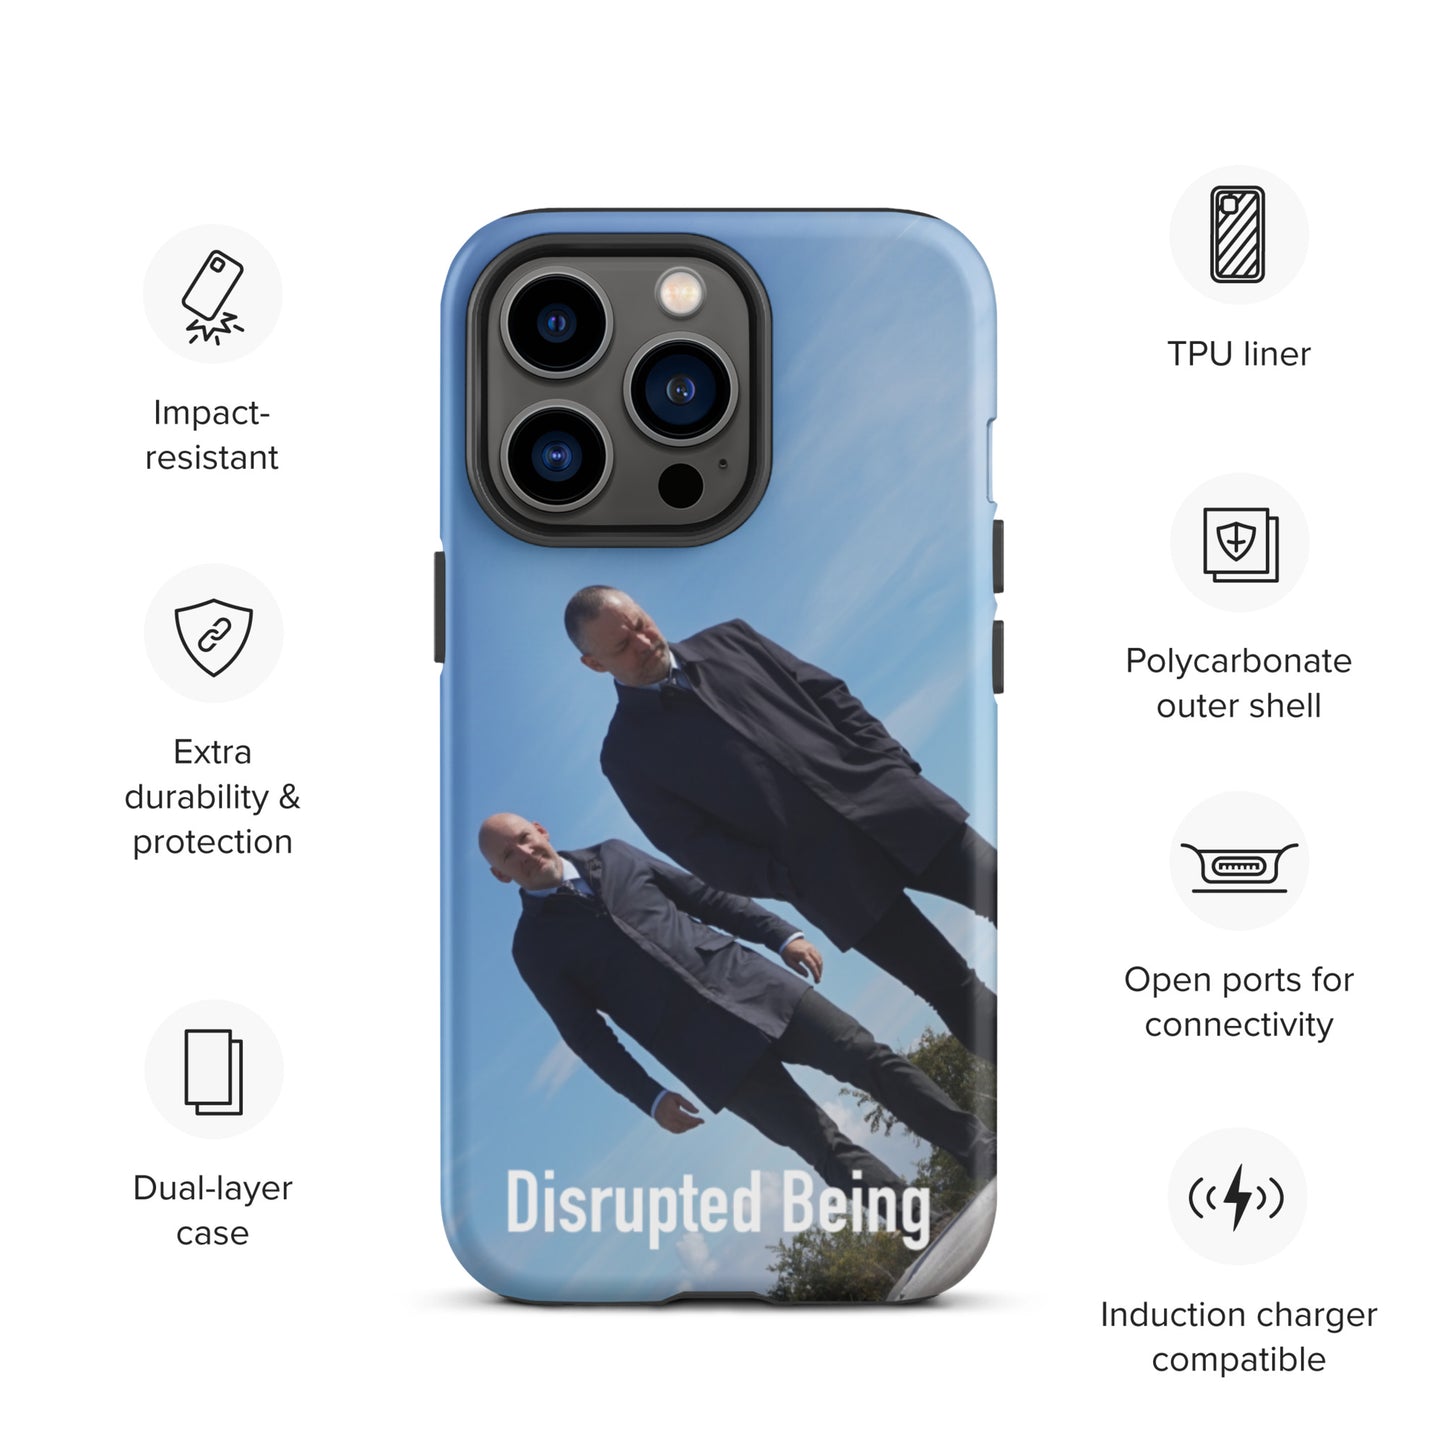 Disrupted Being, official photo and logo, Tough iPhone case